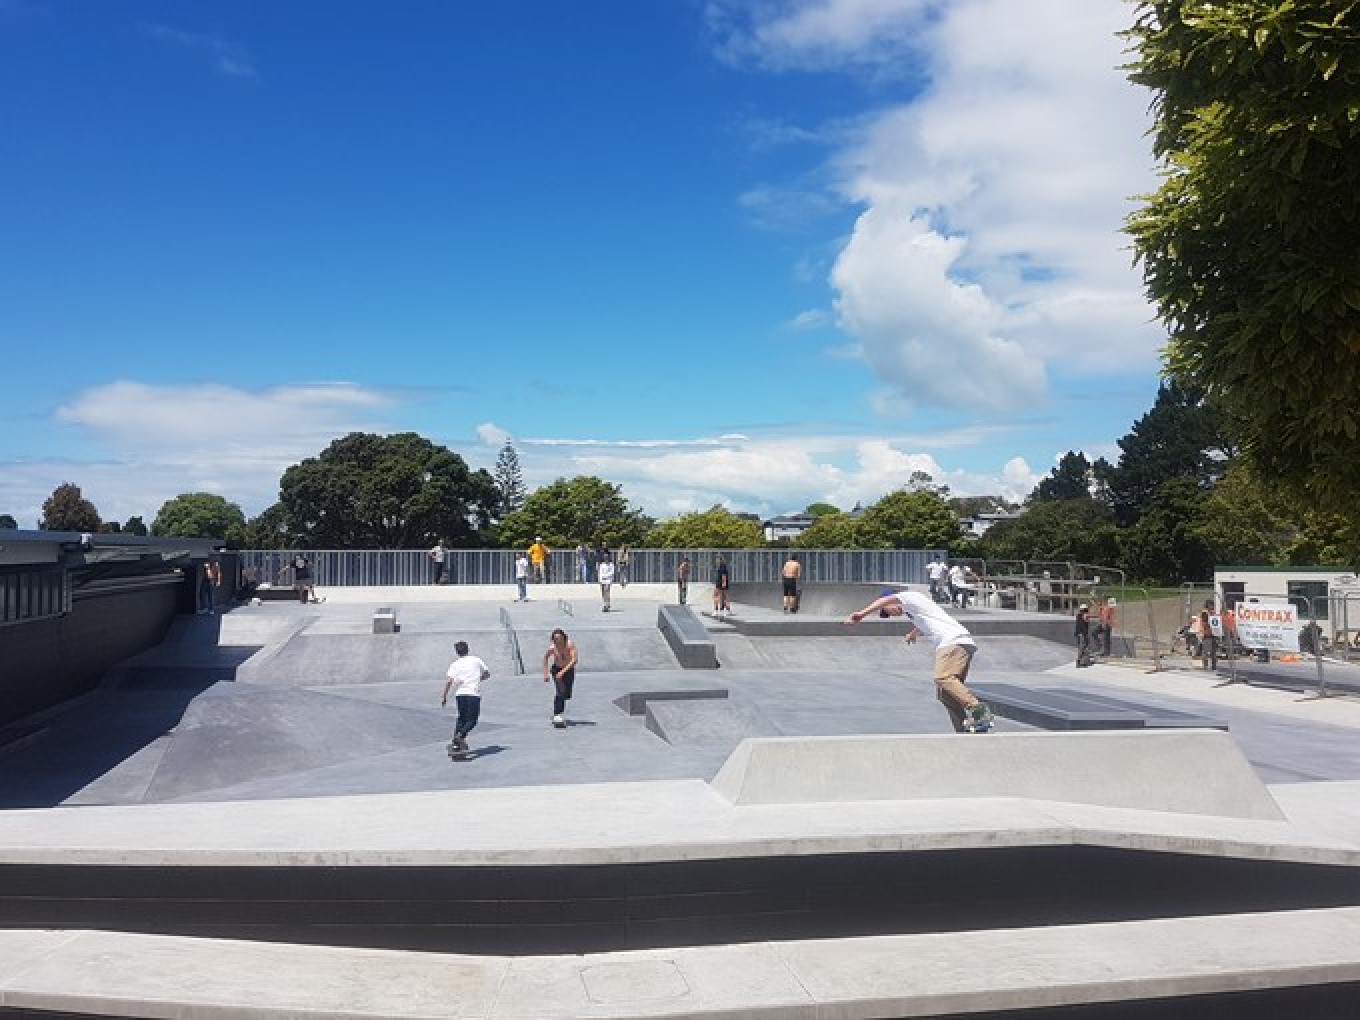 Picture of several people skateboarding at the Birkenhead Skatepark on a sunny day